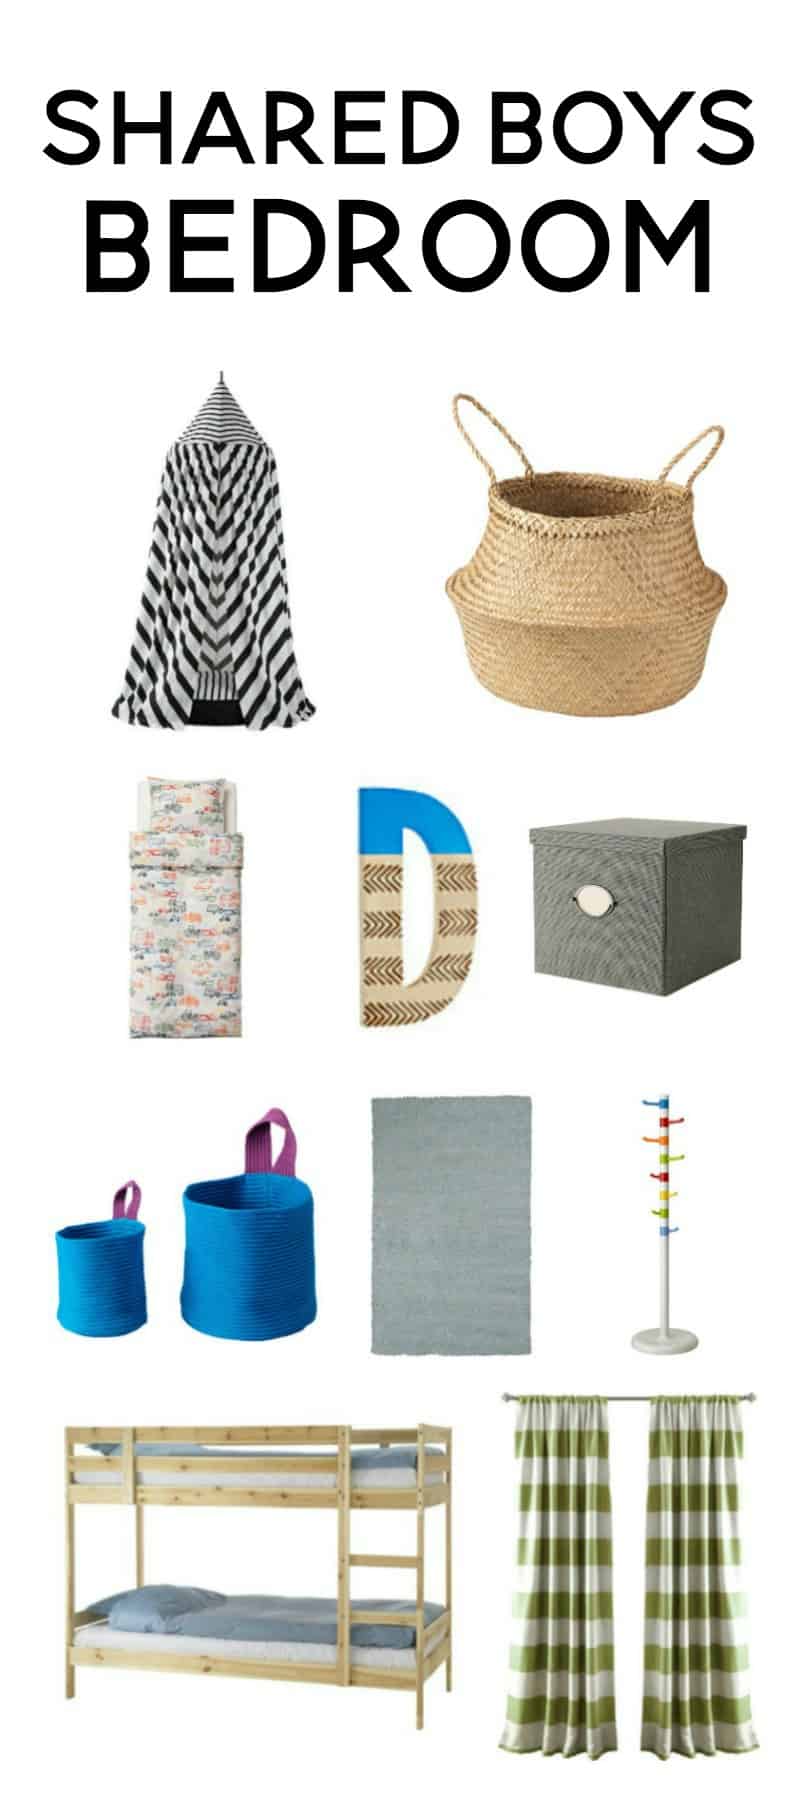 A collage of decoration we picked for our shared boys bedroom, including a bunk bed, curtains, storage containers and more.